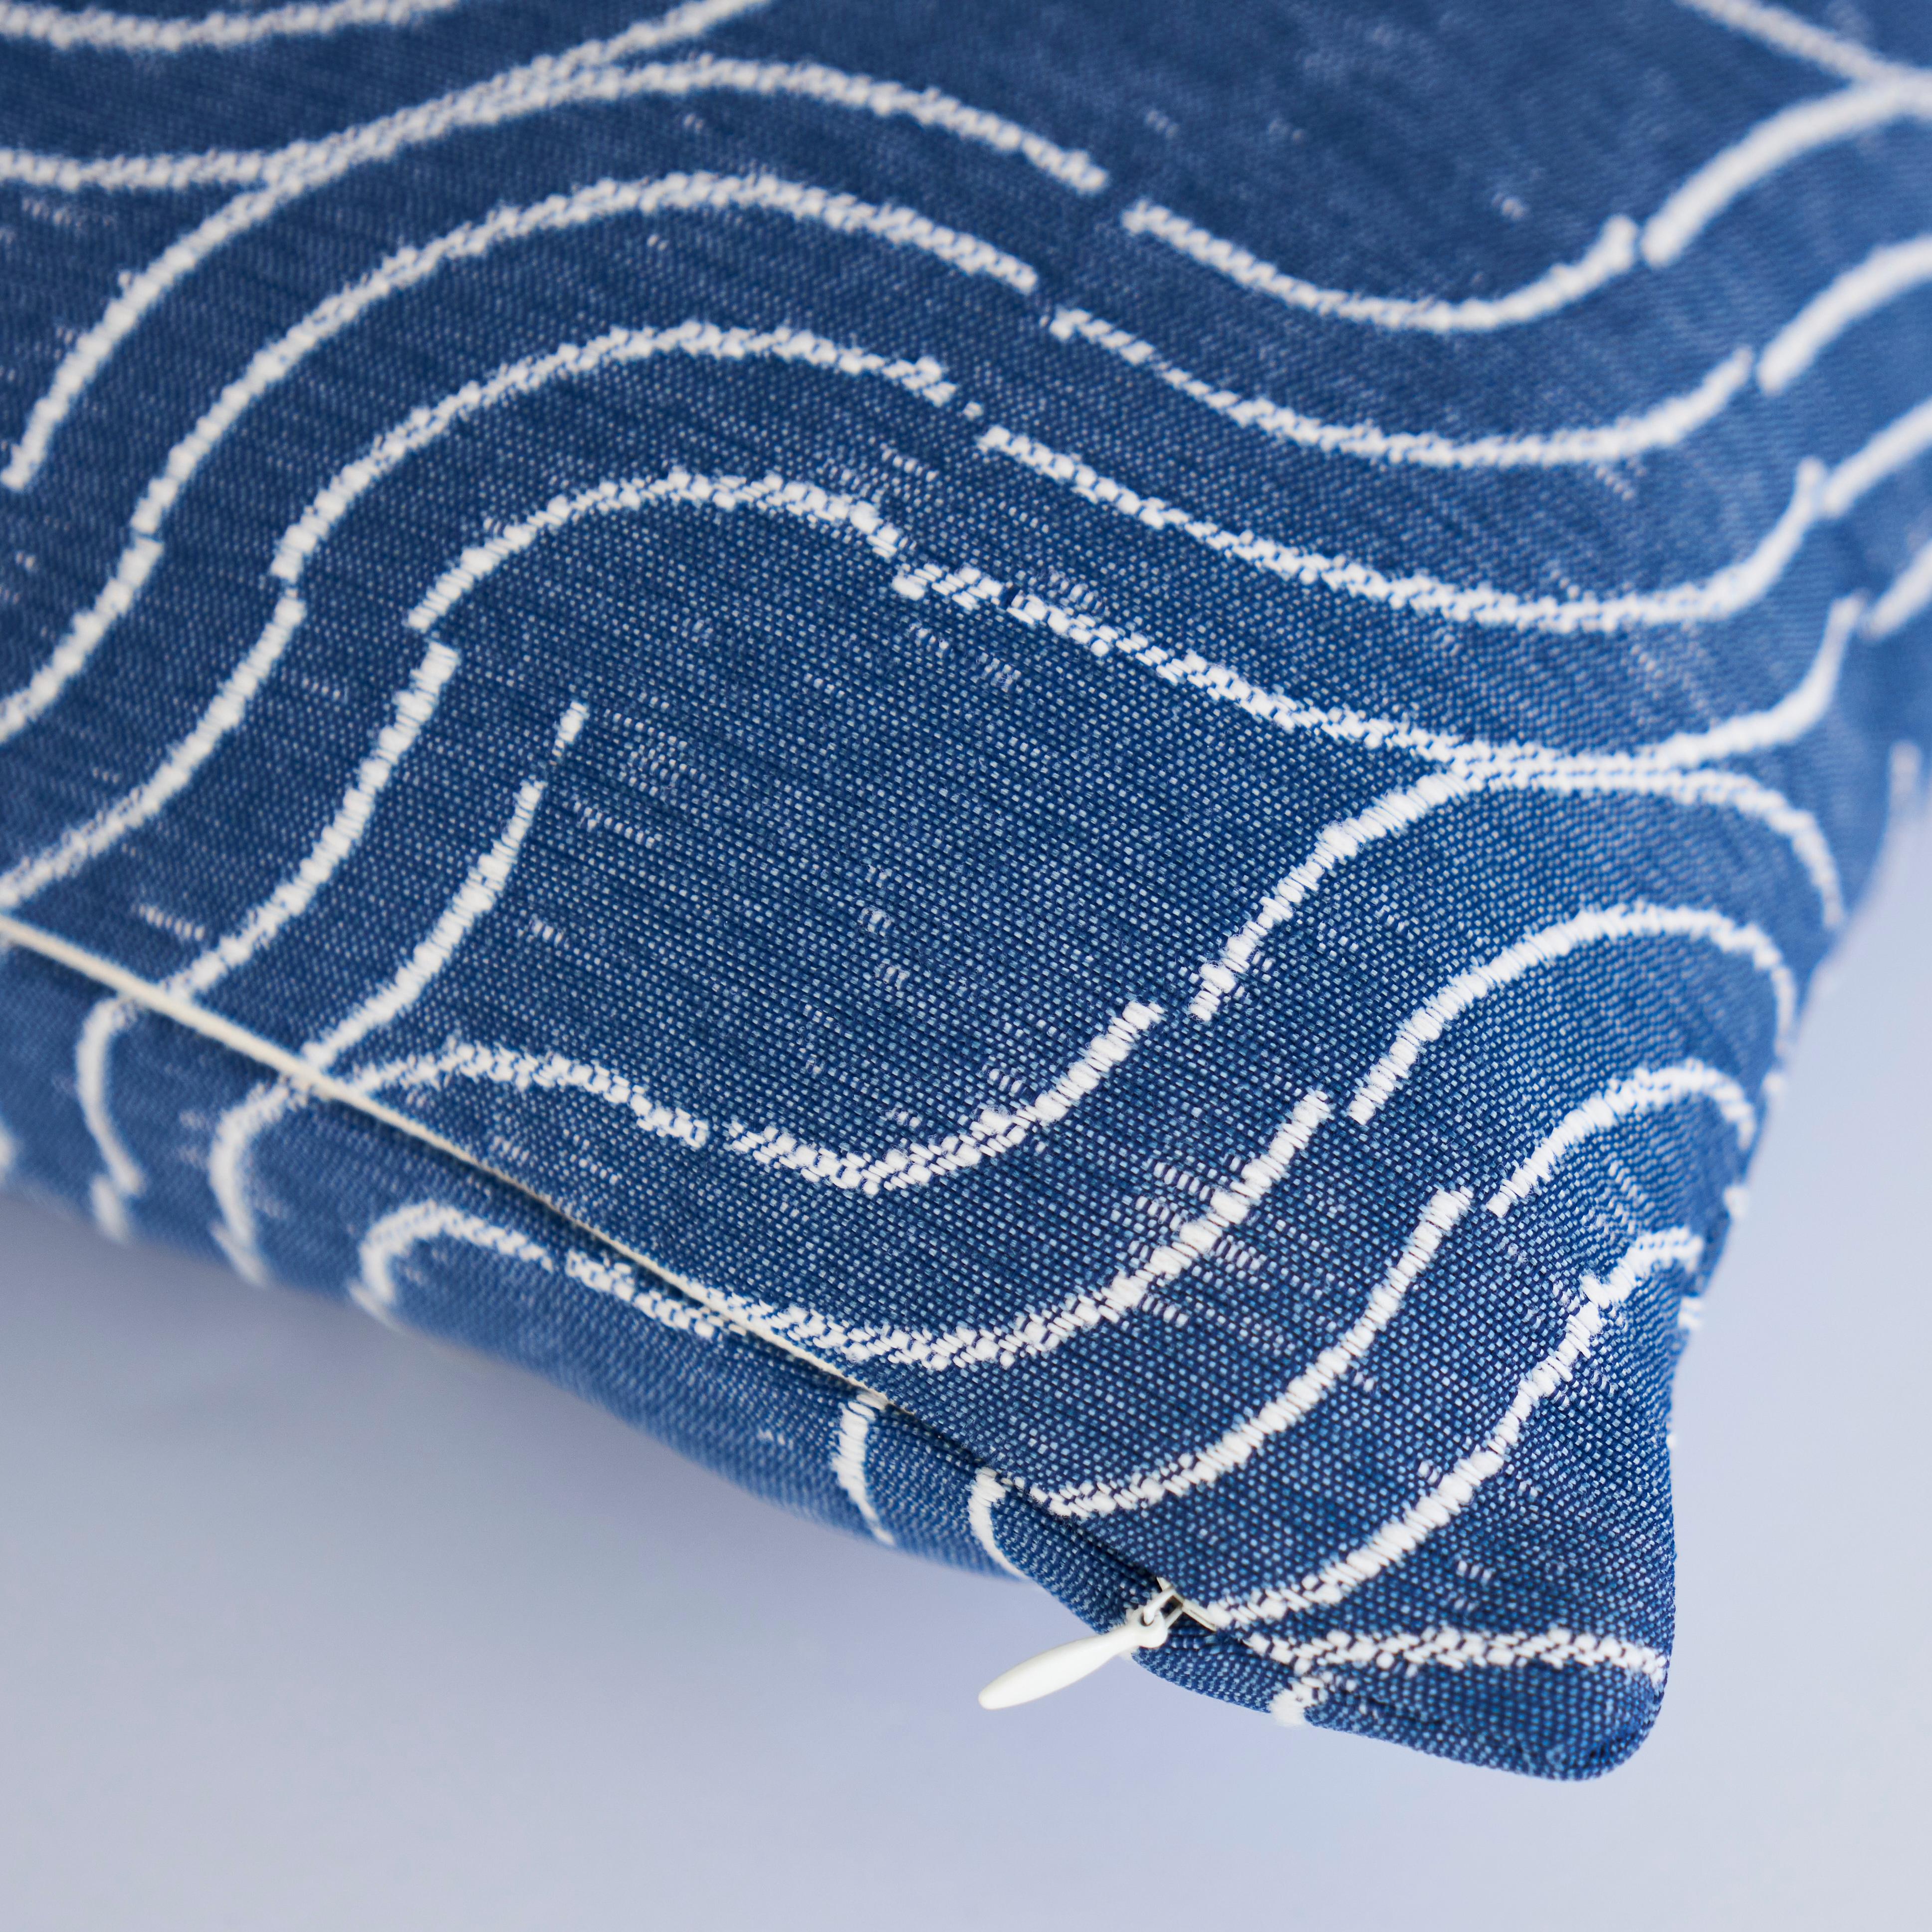 This pillow features Alma Indoor/Outdoor with a knife edge finish. Based on a woodblock our design director carved by hand, this interlocking pattern reinterprets a block-print into a winning, rugged high-performance woven with an artisanal feel.